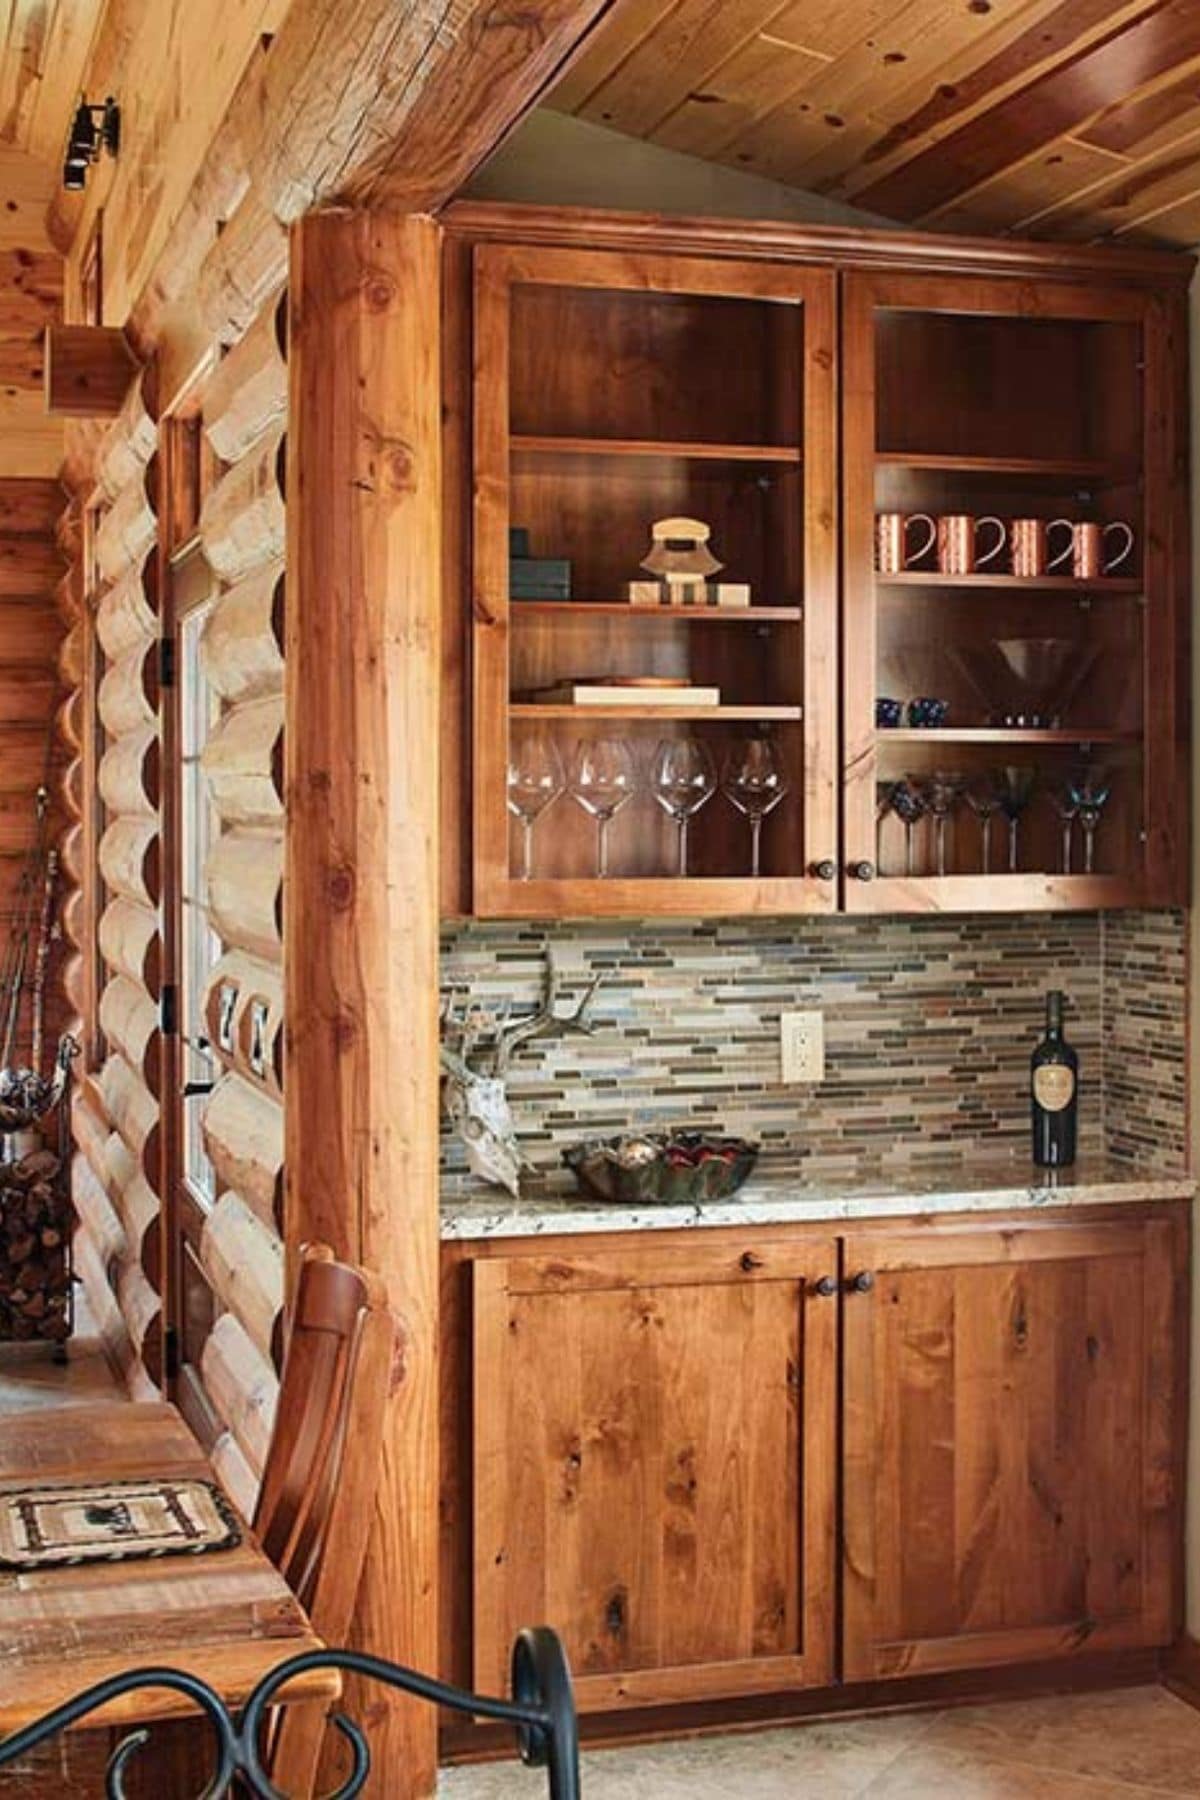 hutch with wine glasses against wall of log cabin with tile backsplash